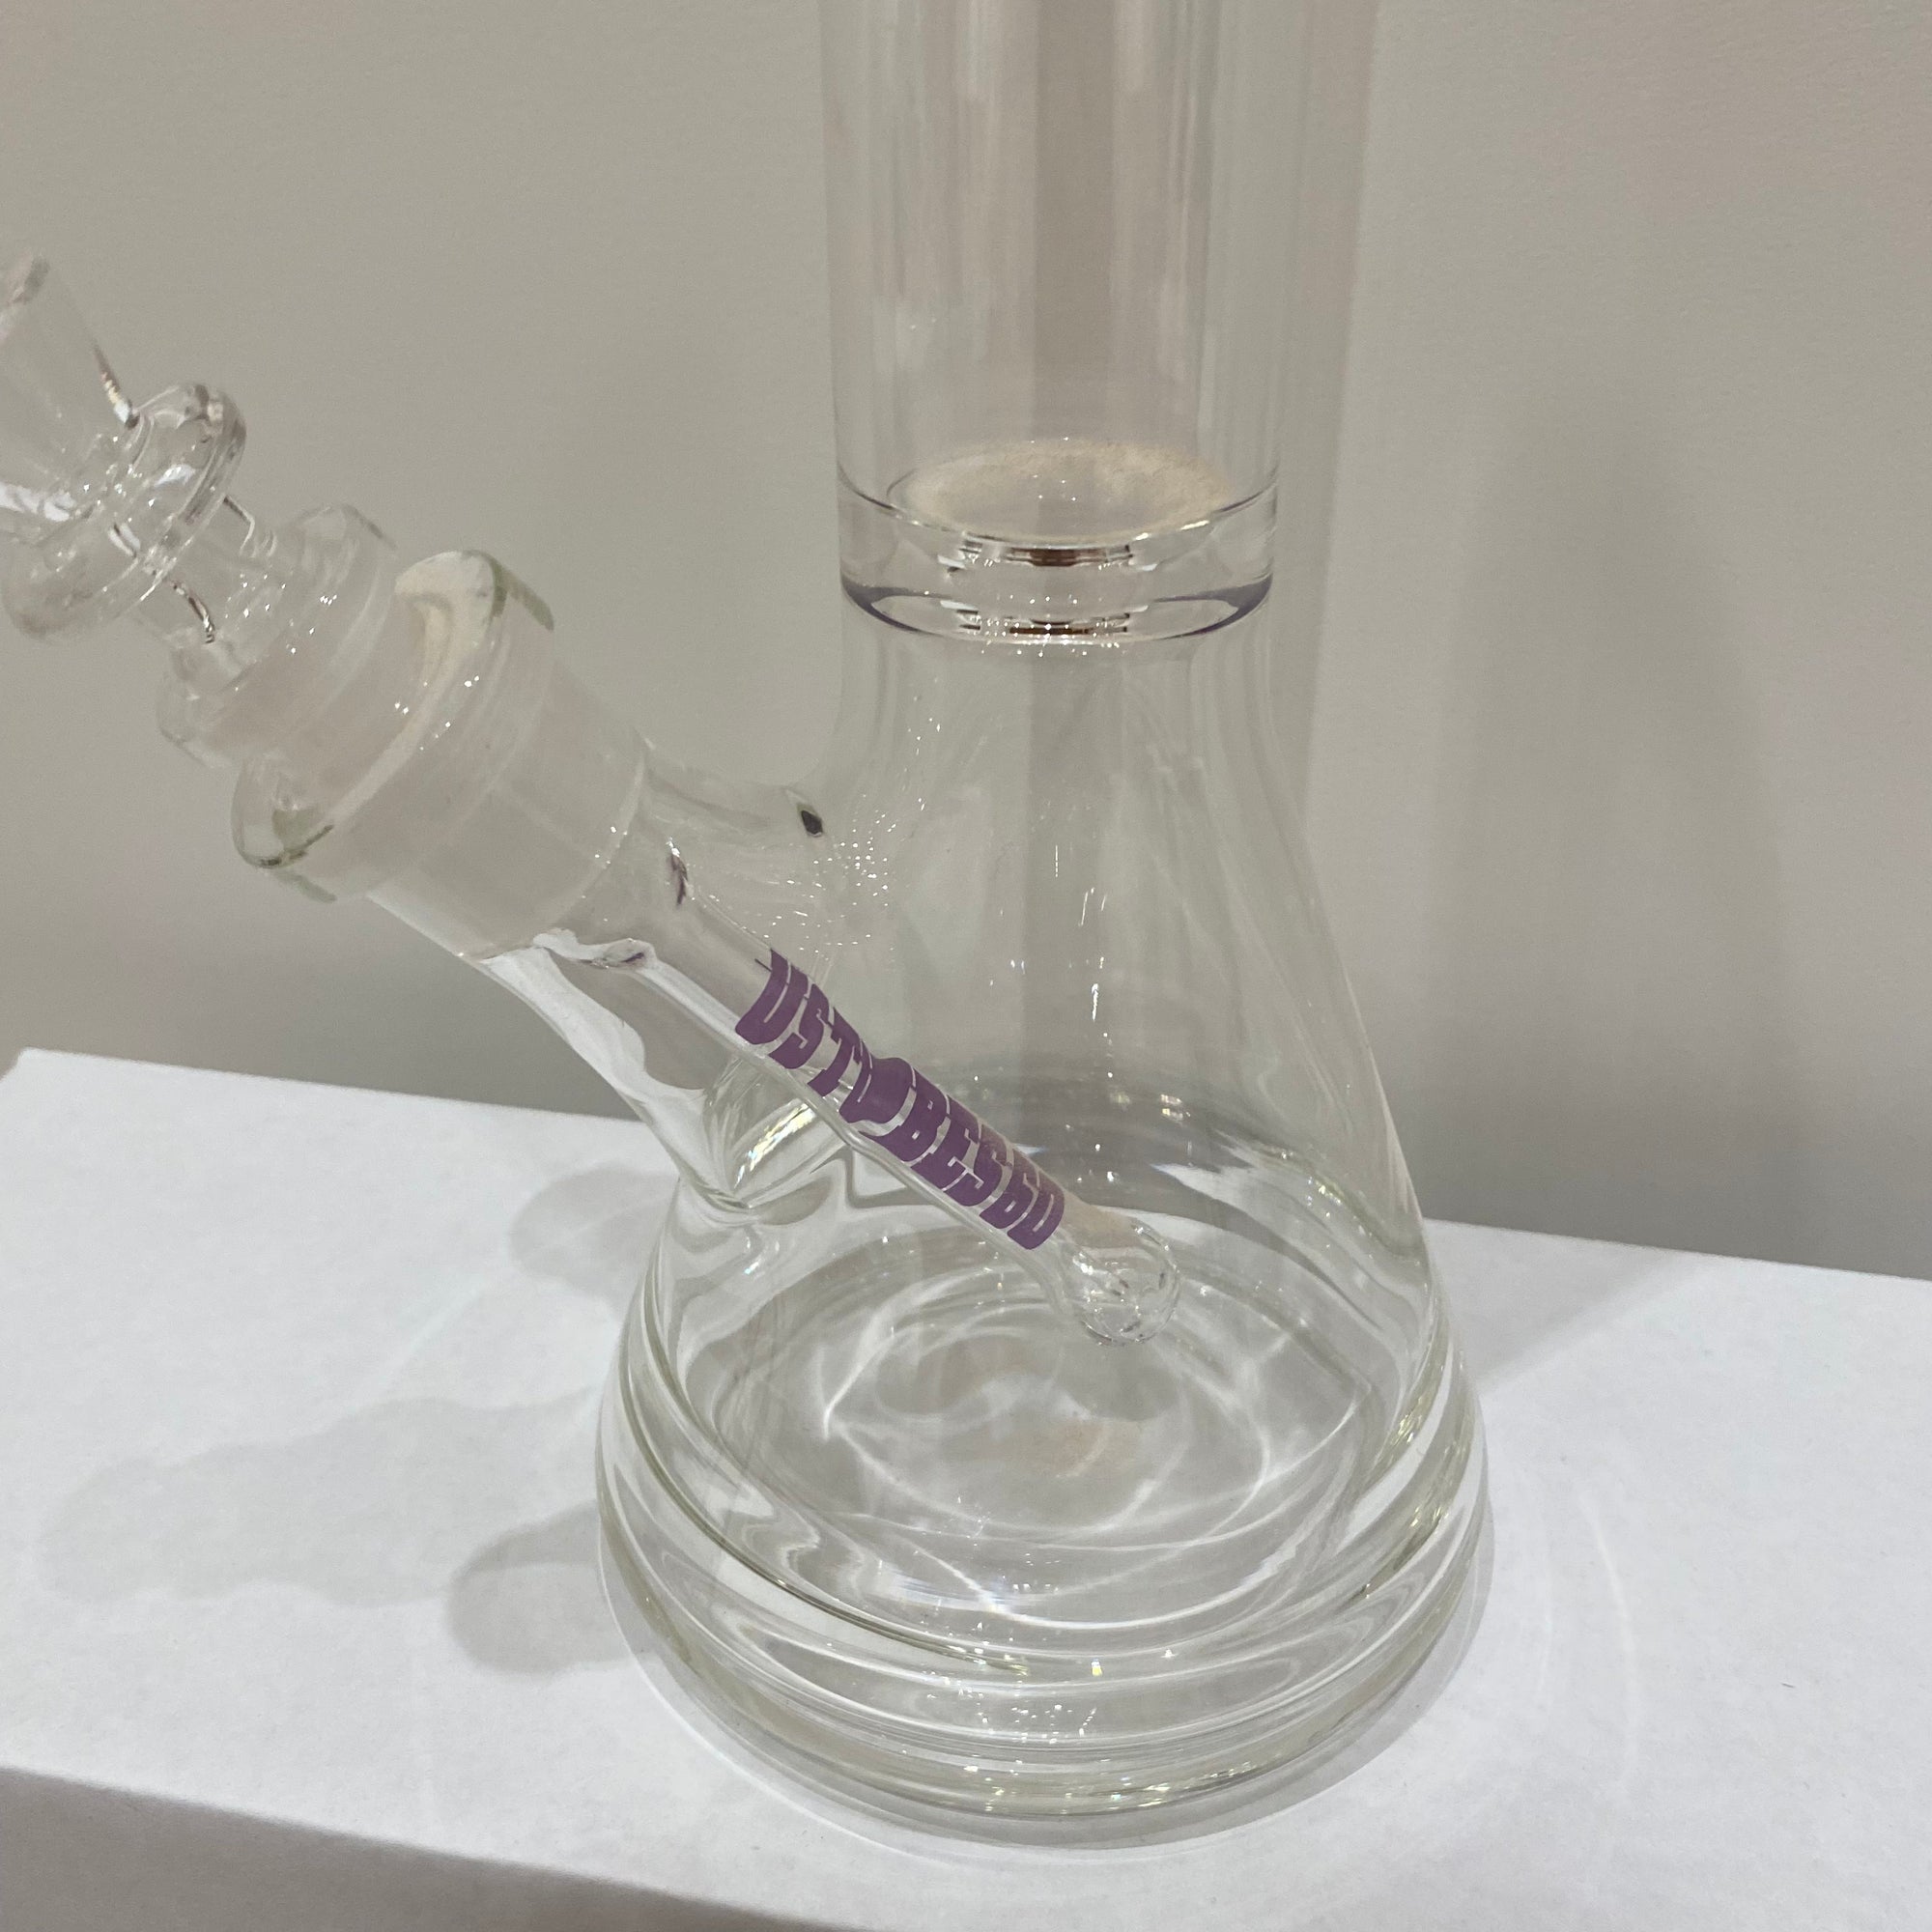 US Tubes Beaker 55, 20 Inch, Constriction, 24mm Joint